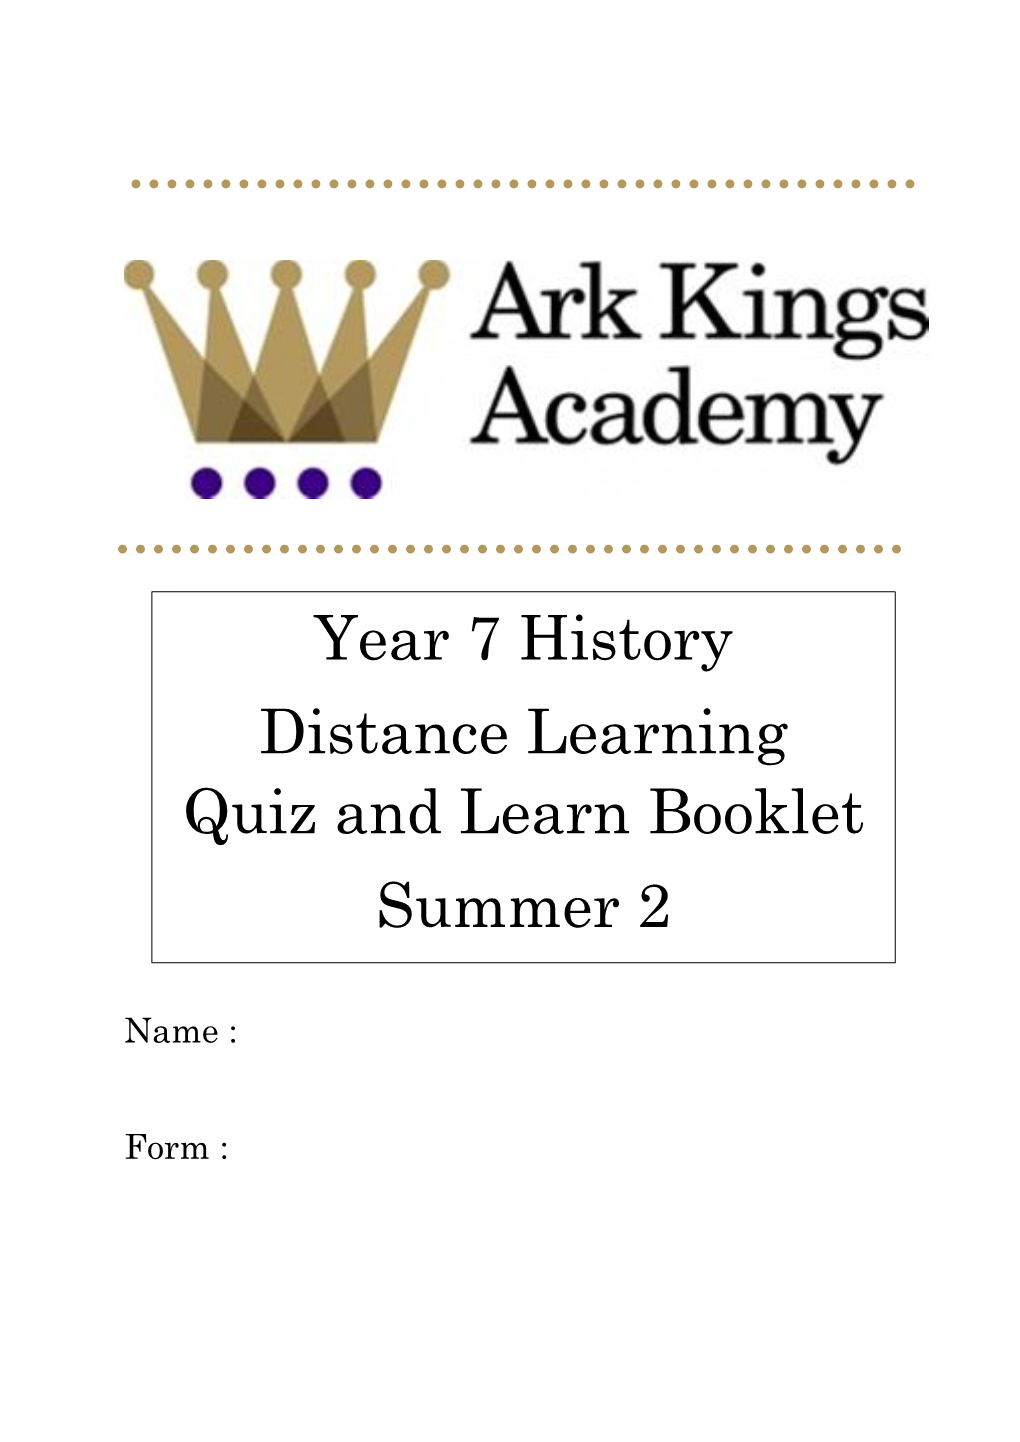 Year 7 History Distance Learning Quiz and Learn Booklet Summer 2